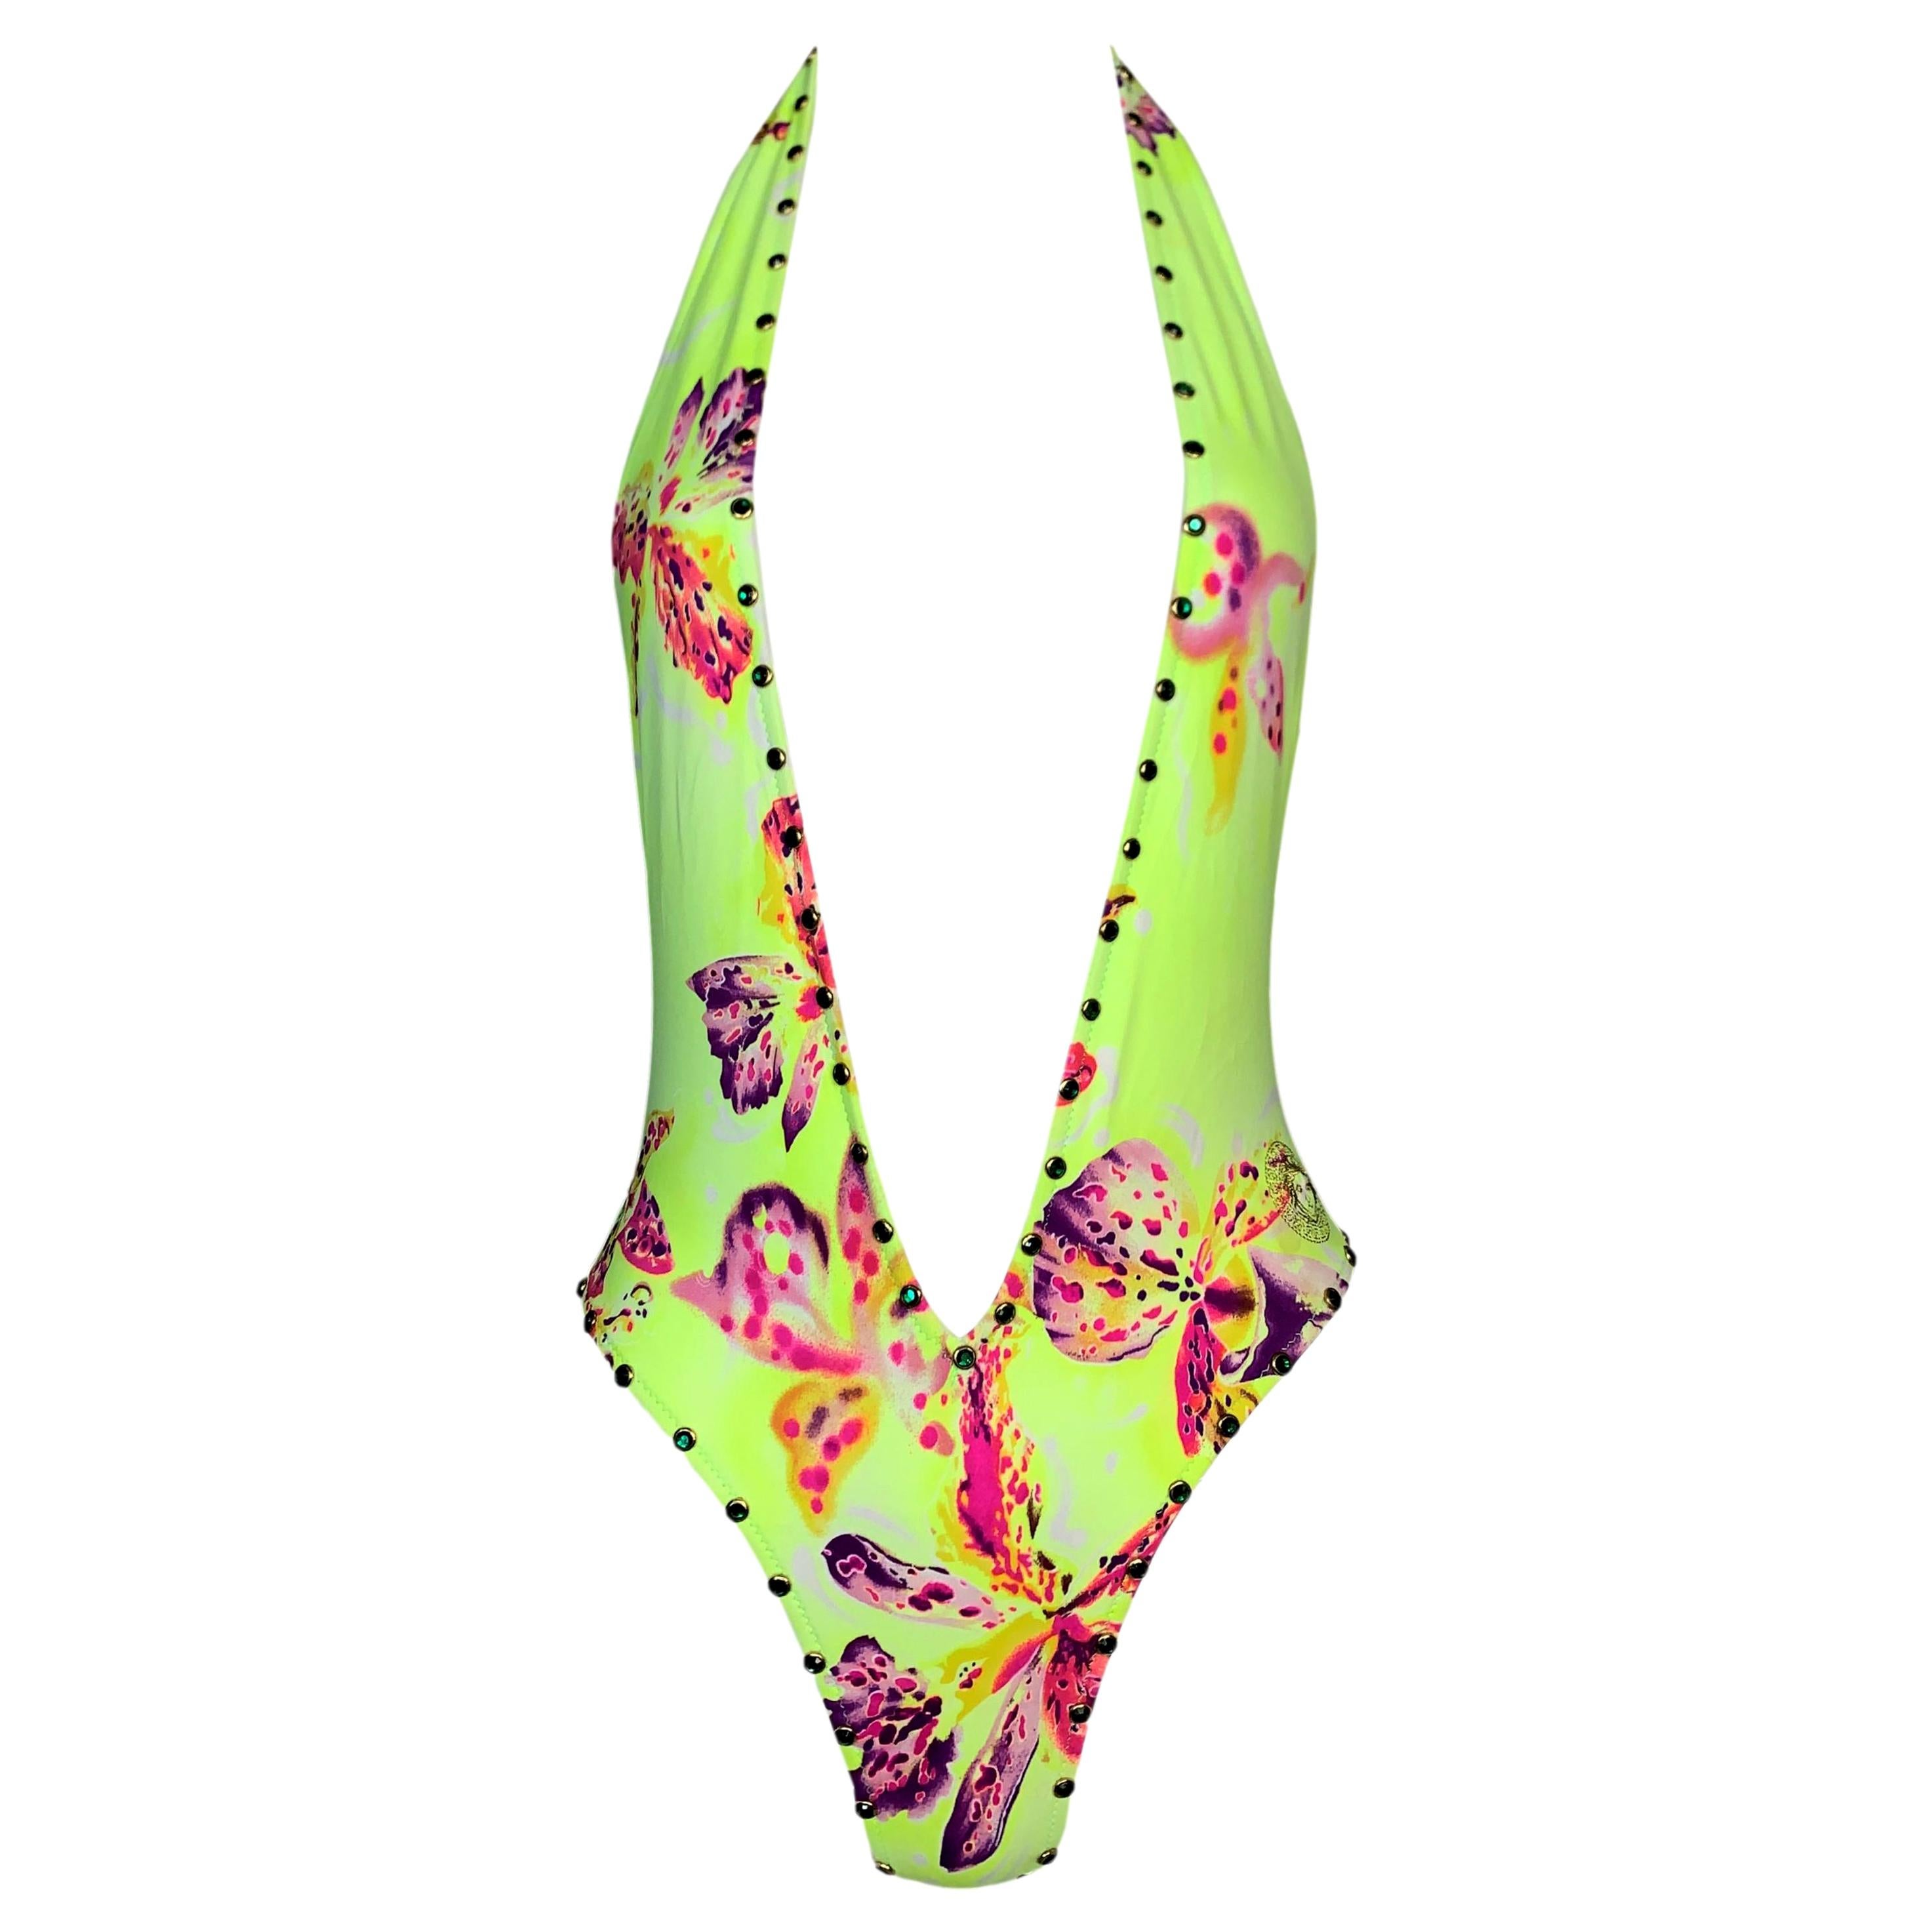 S/S 2000 Gianni Versace Runway Plunging Neon Yellow Studded Swimsuit For  Sale at 1stDibs